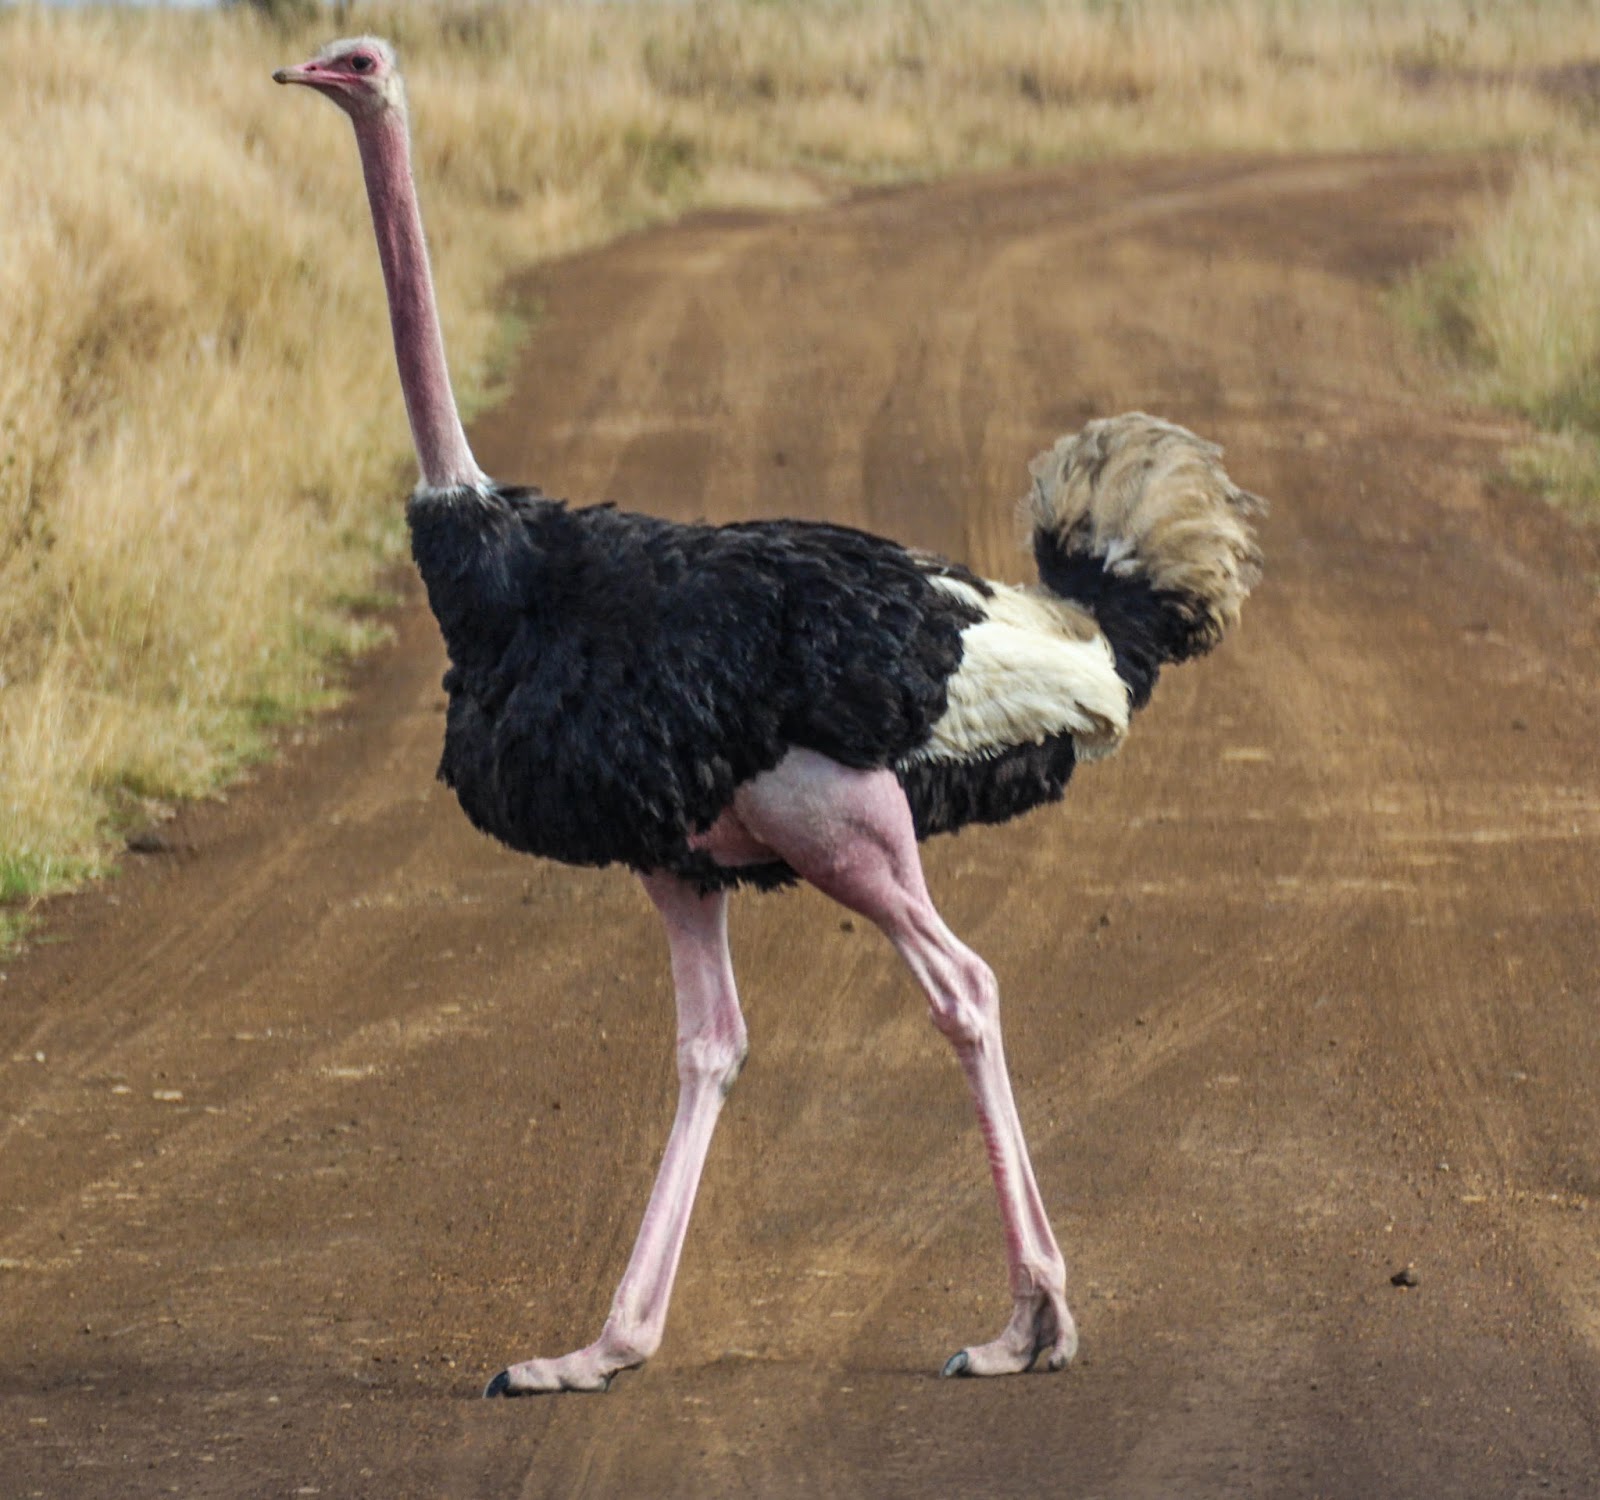 Ostriches are scary motherfuckers - Album on Imgur